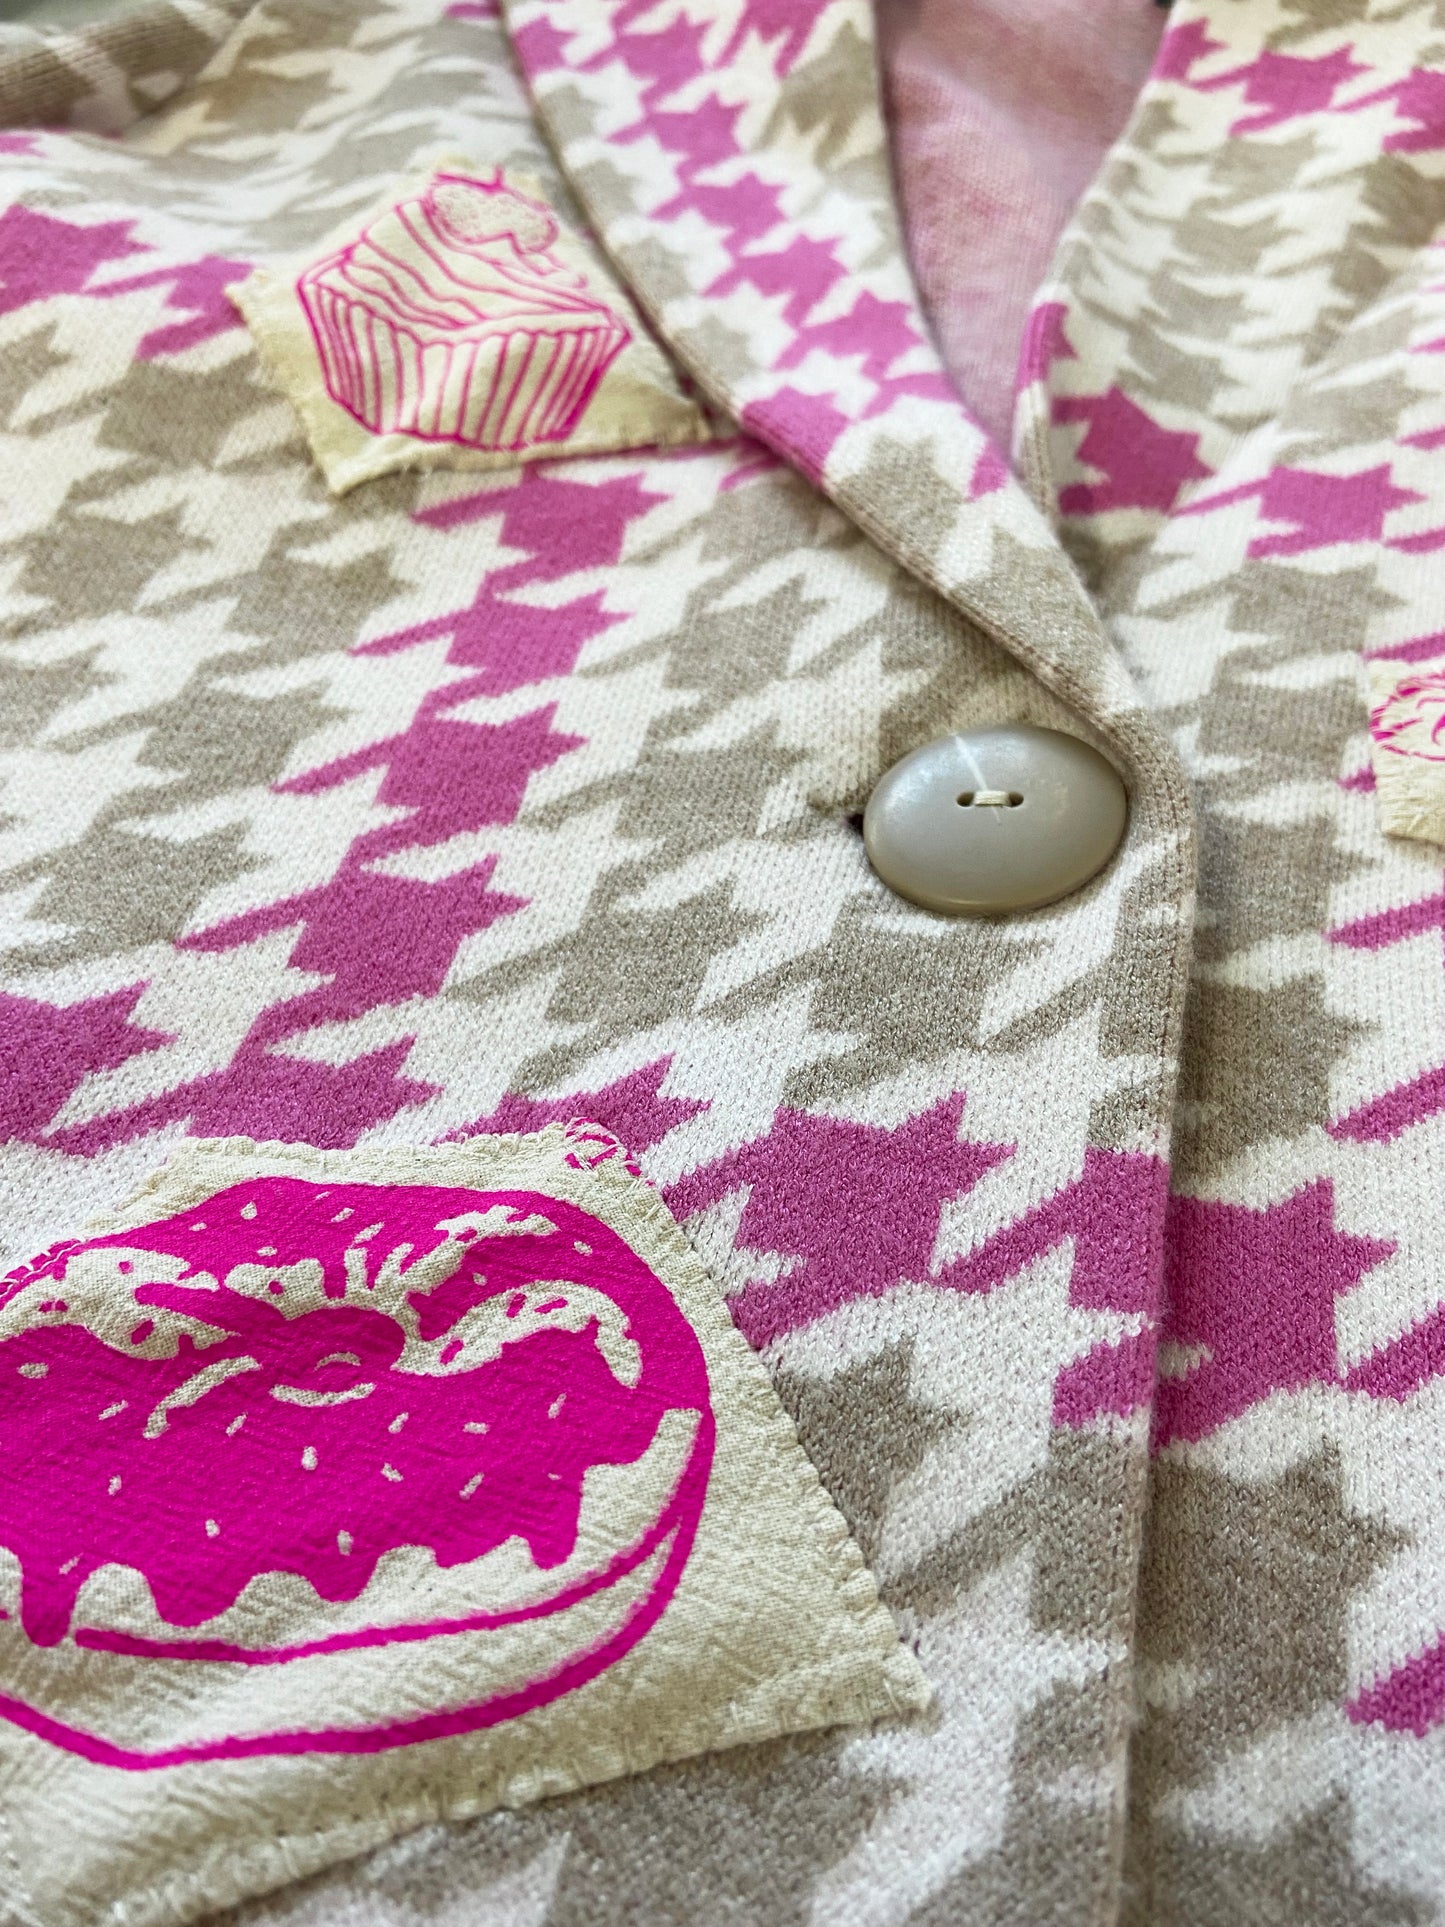 One of a Kind Hand Printed and Sewn Bakery Good Patches on Houndstooth Jacket